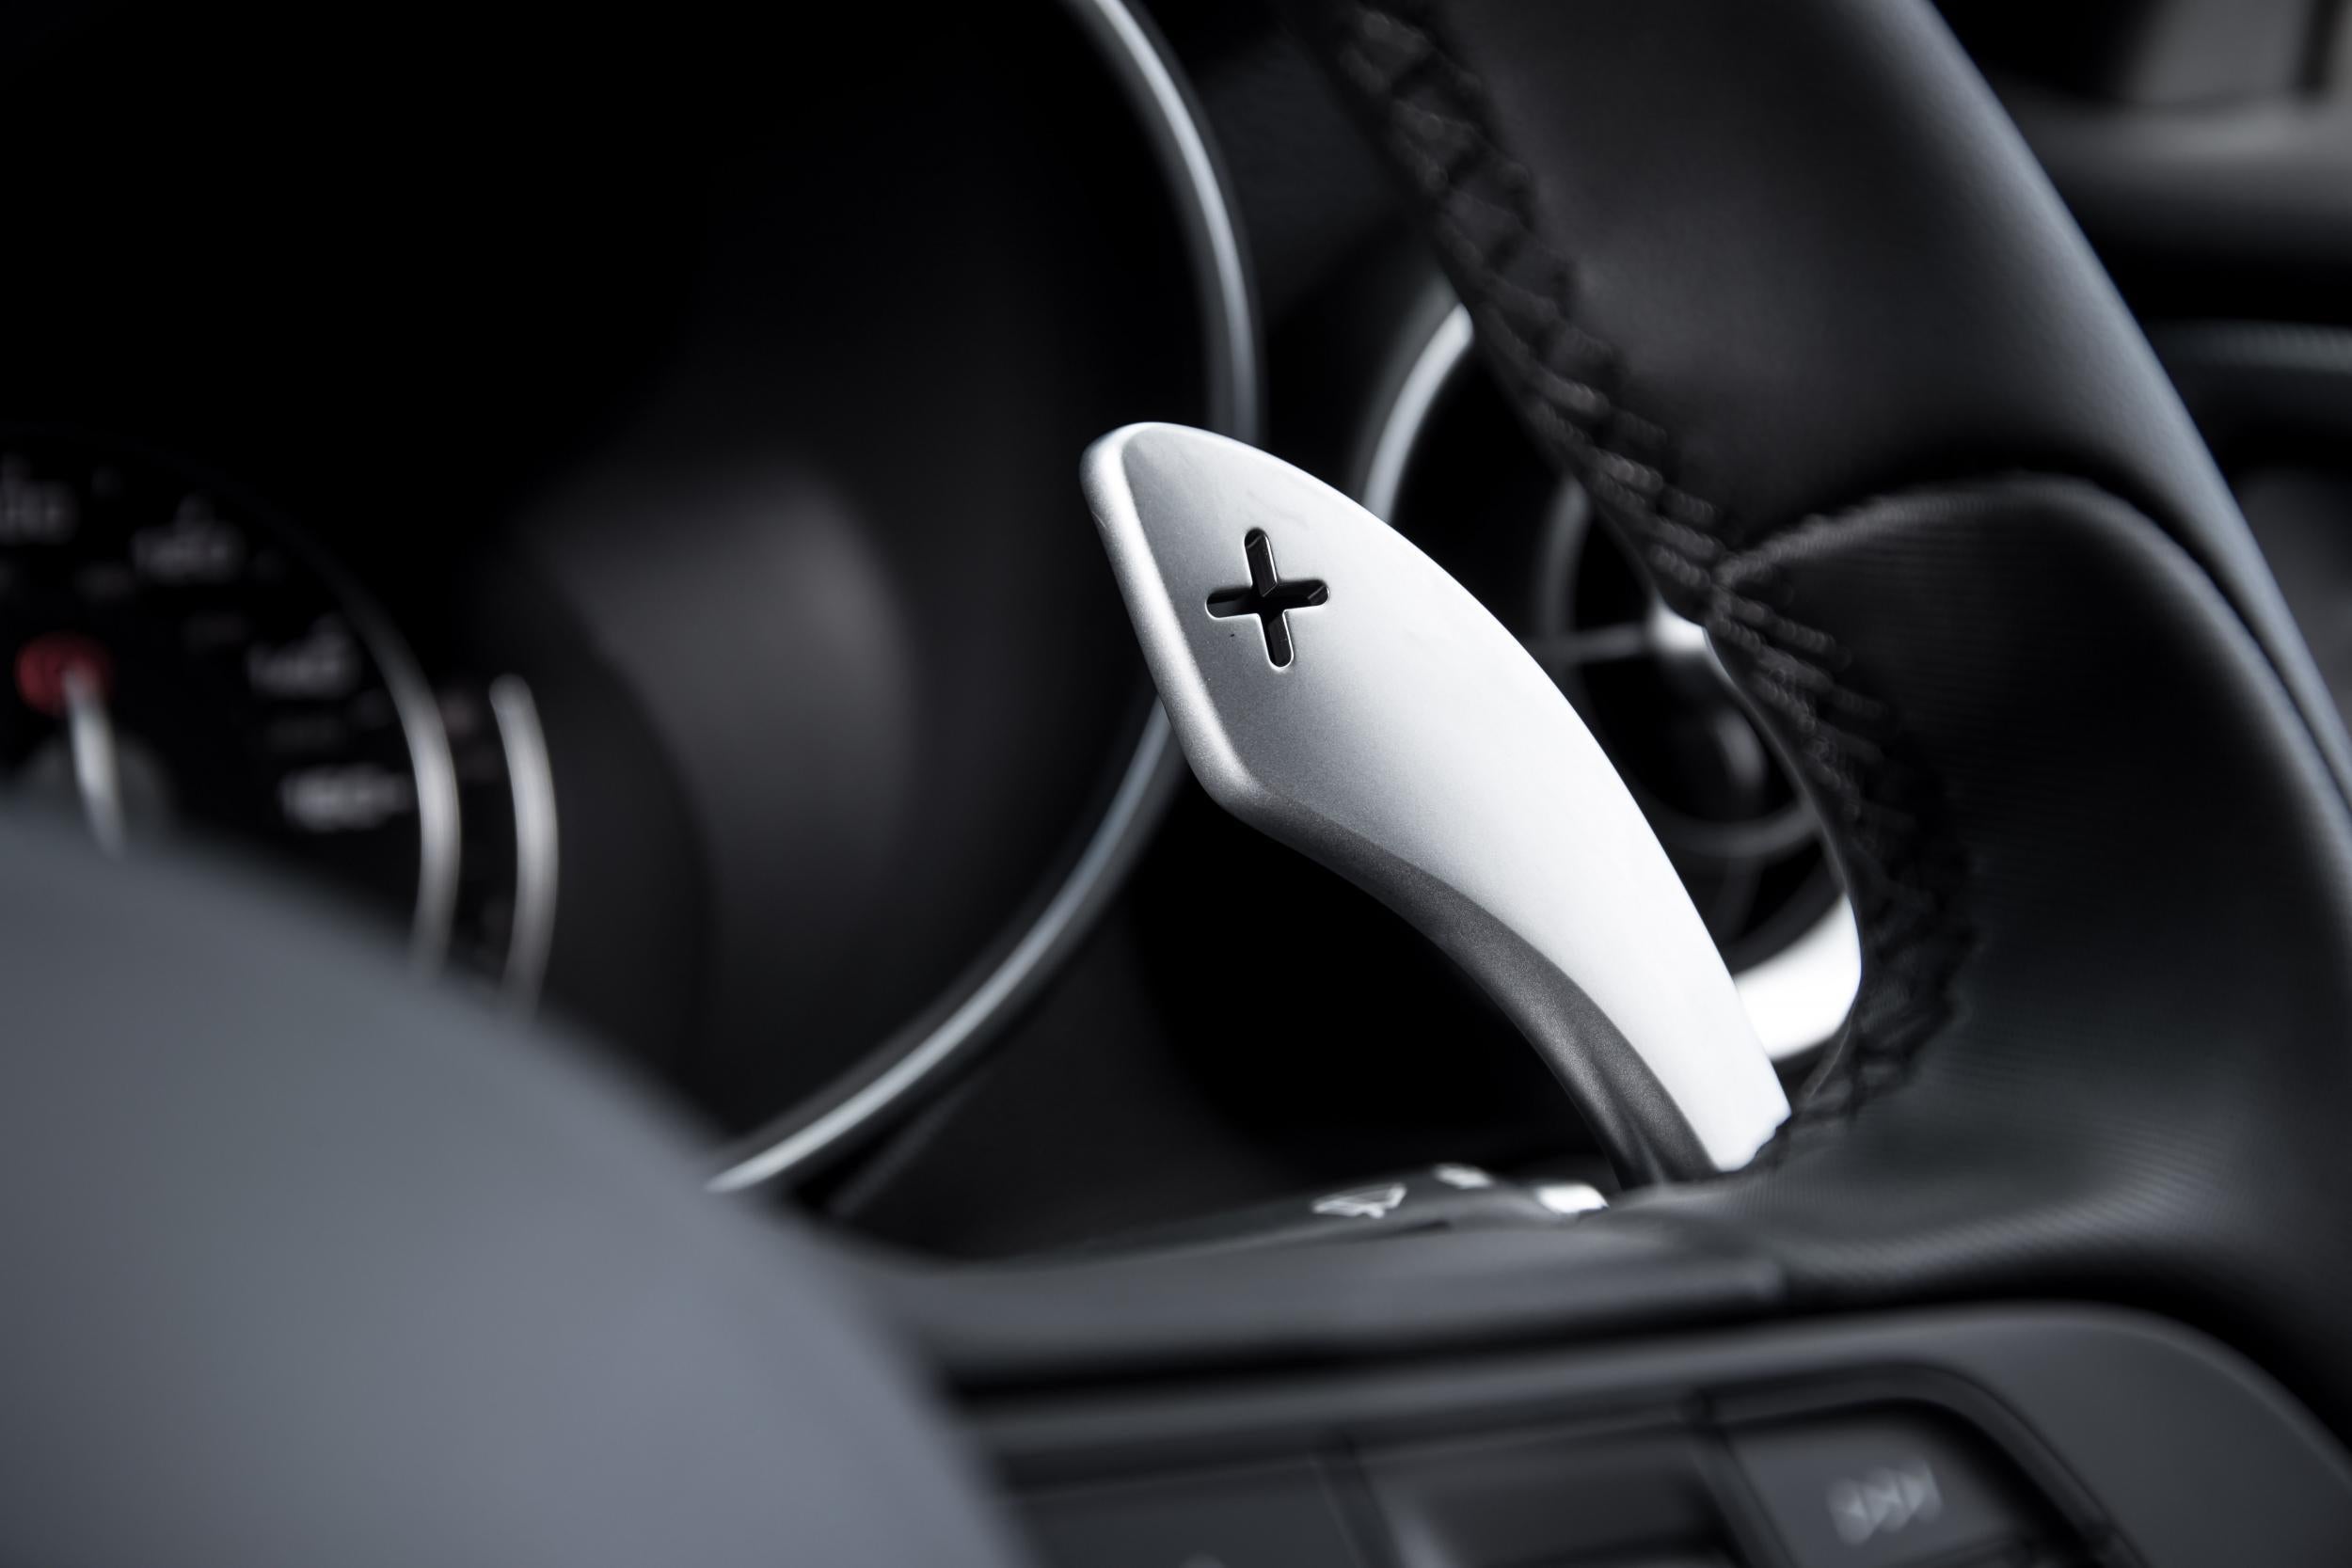 The gear change paddles: elegant but a bit pointless